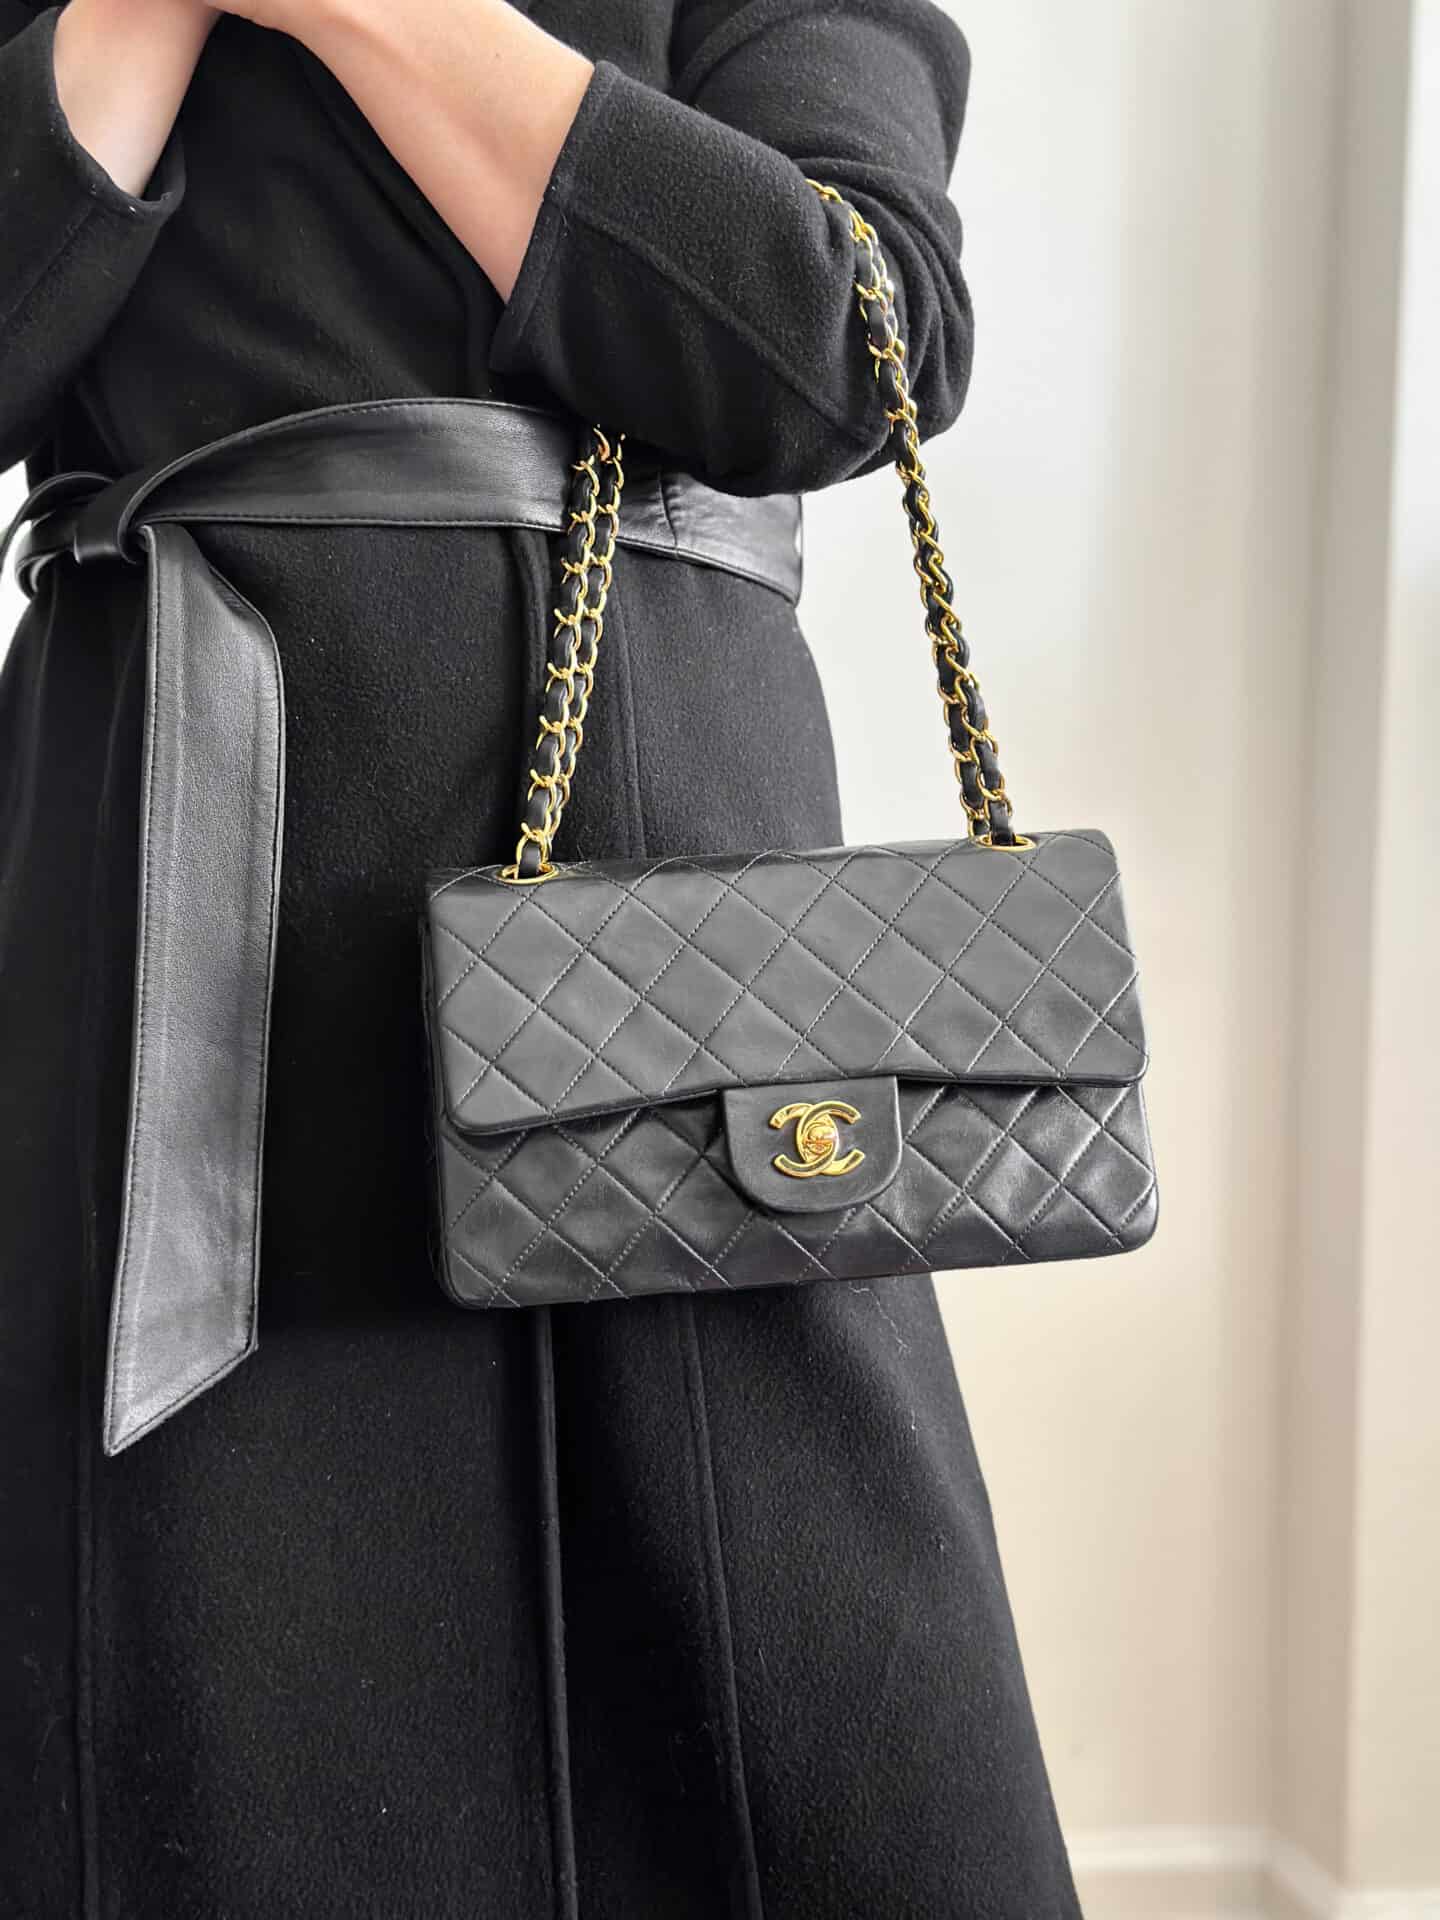 tips for buying your first Chanel bag